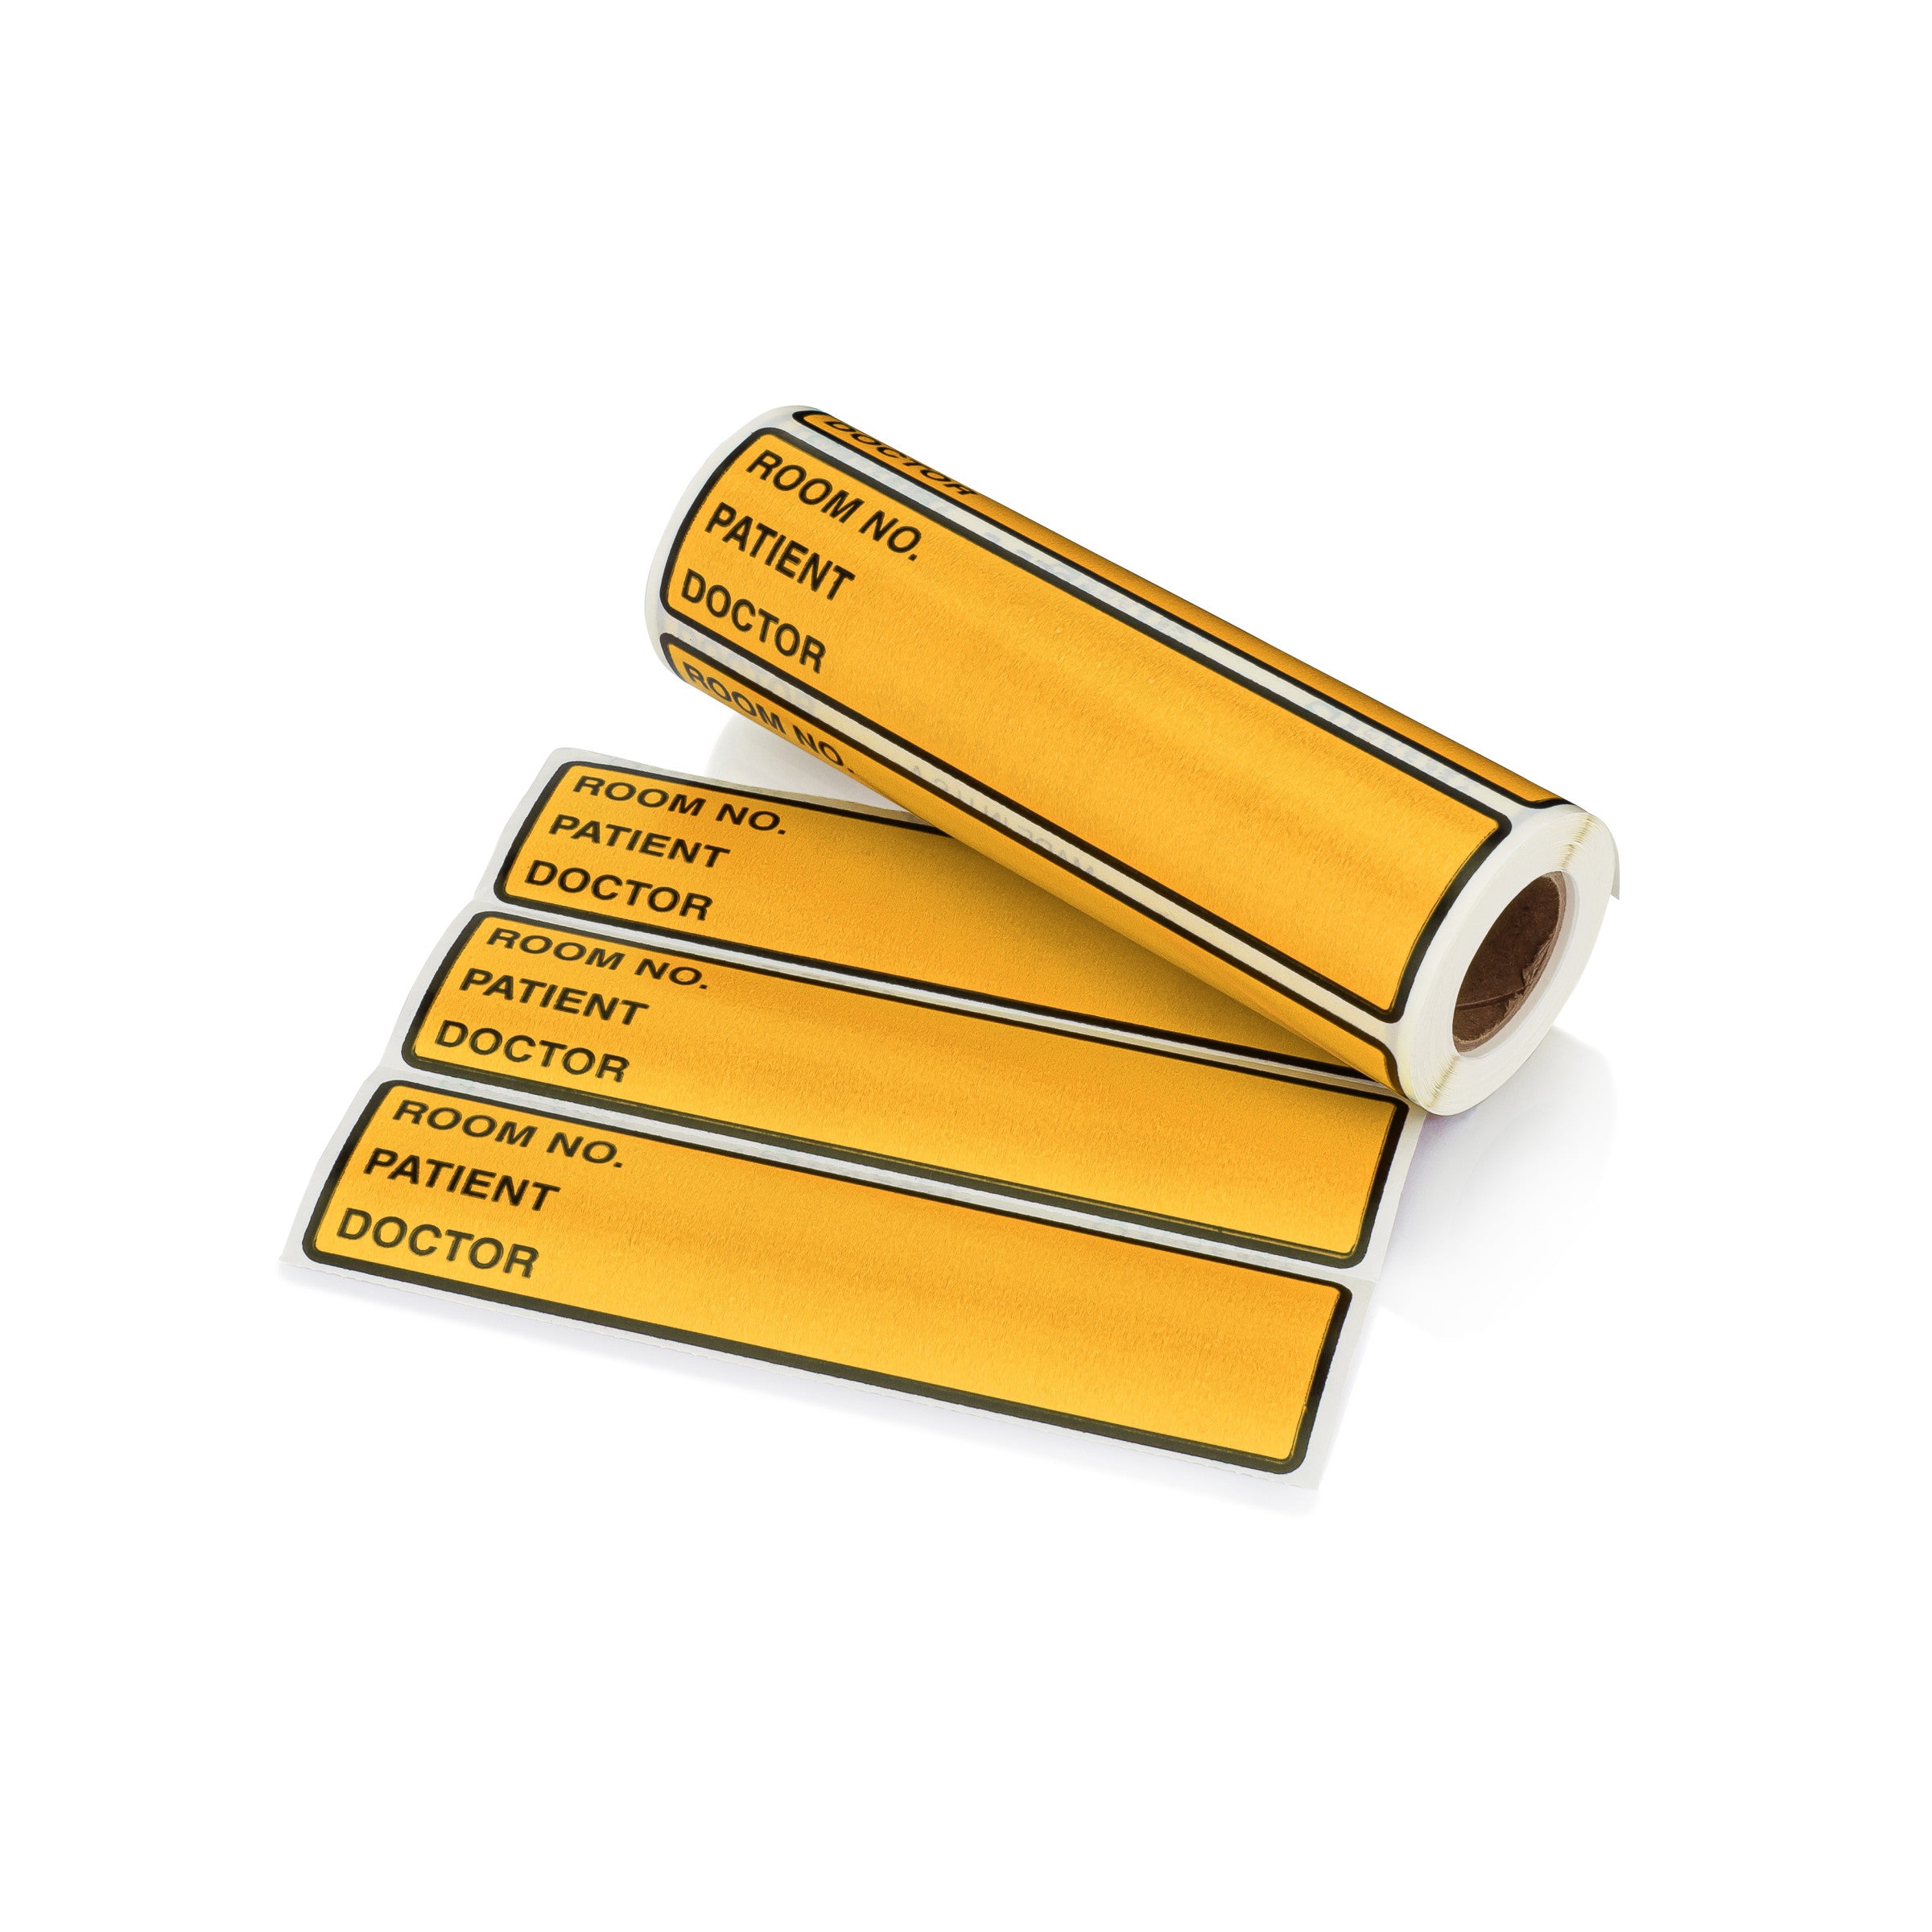 Room No. / Patient / Doctor Preprinted ID Labels for 1.5 – 4” Ring Binder Spines - Roll of 200